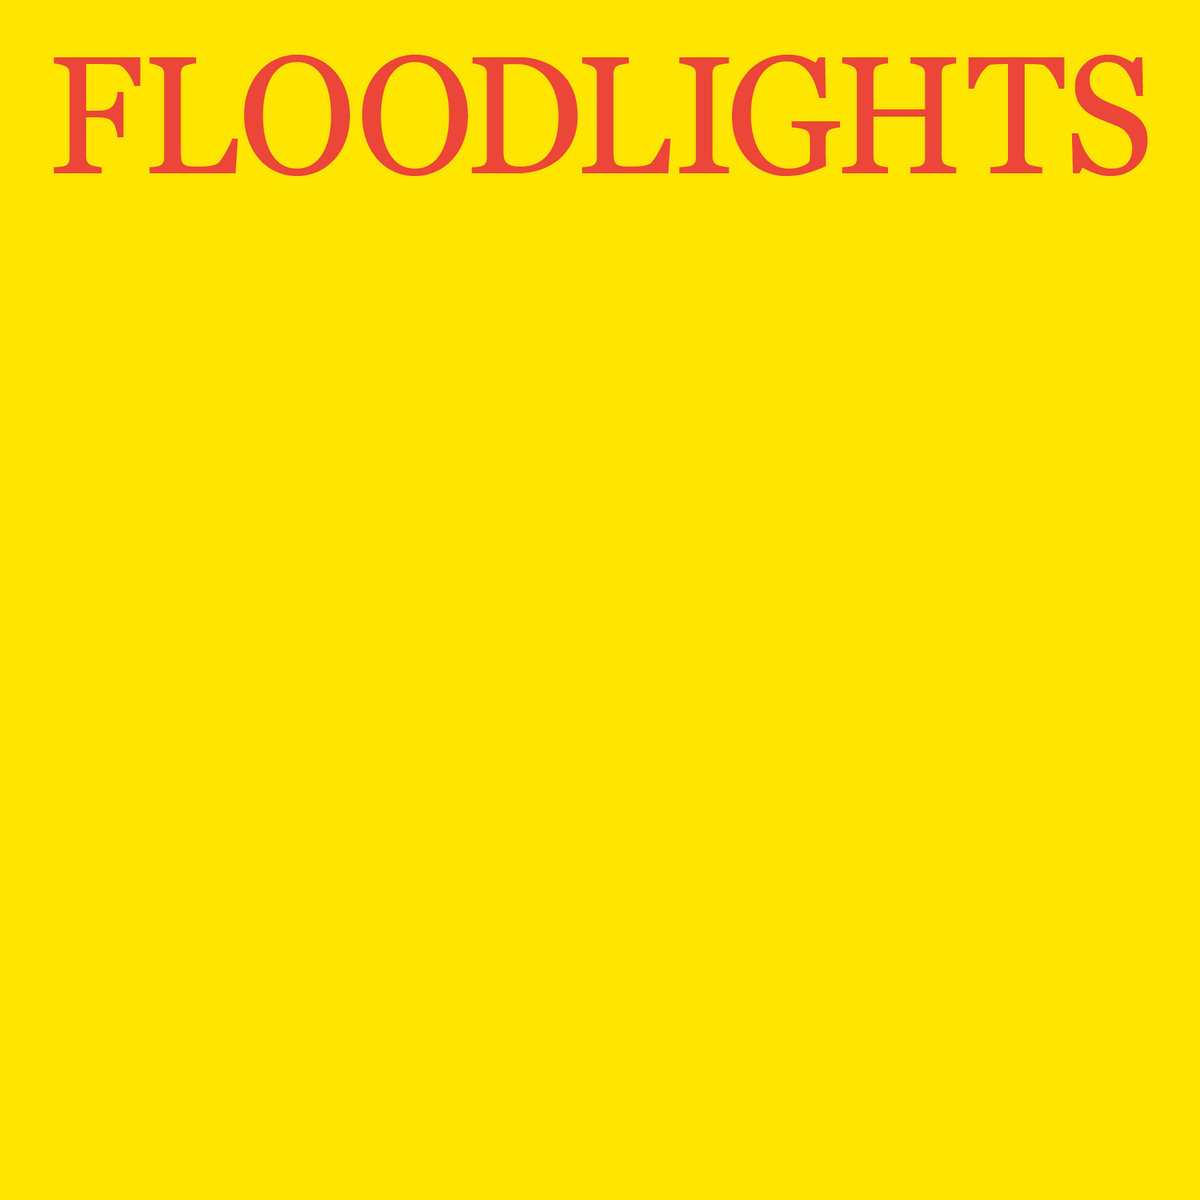 Floodlights the more i am overflowing cup album cover - the word floodlights written in red text on a yellow background